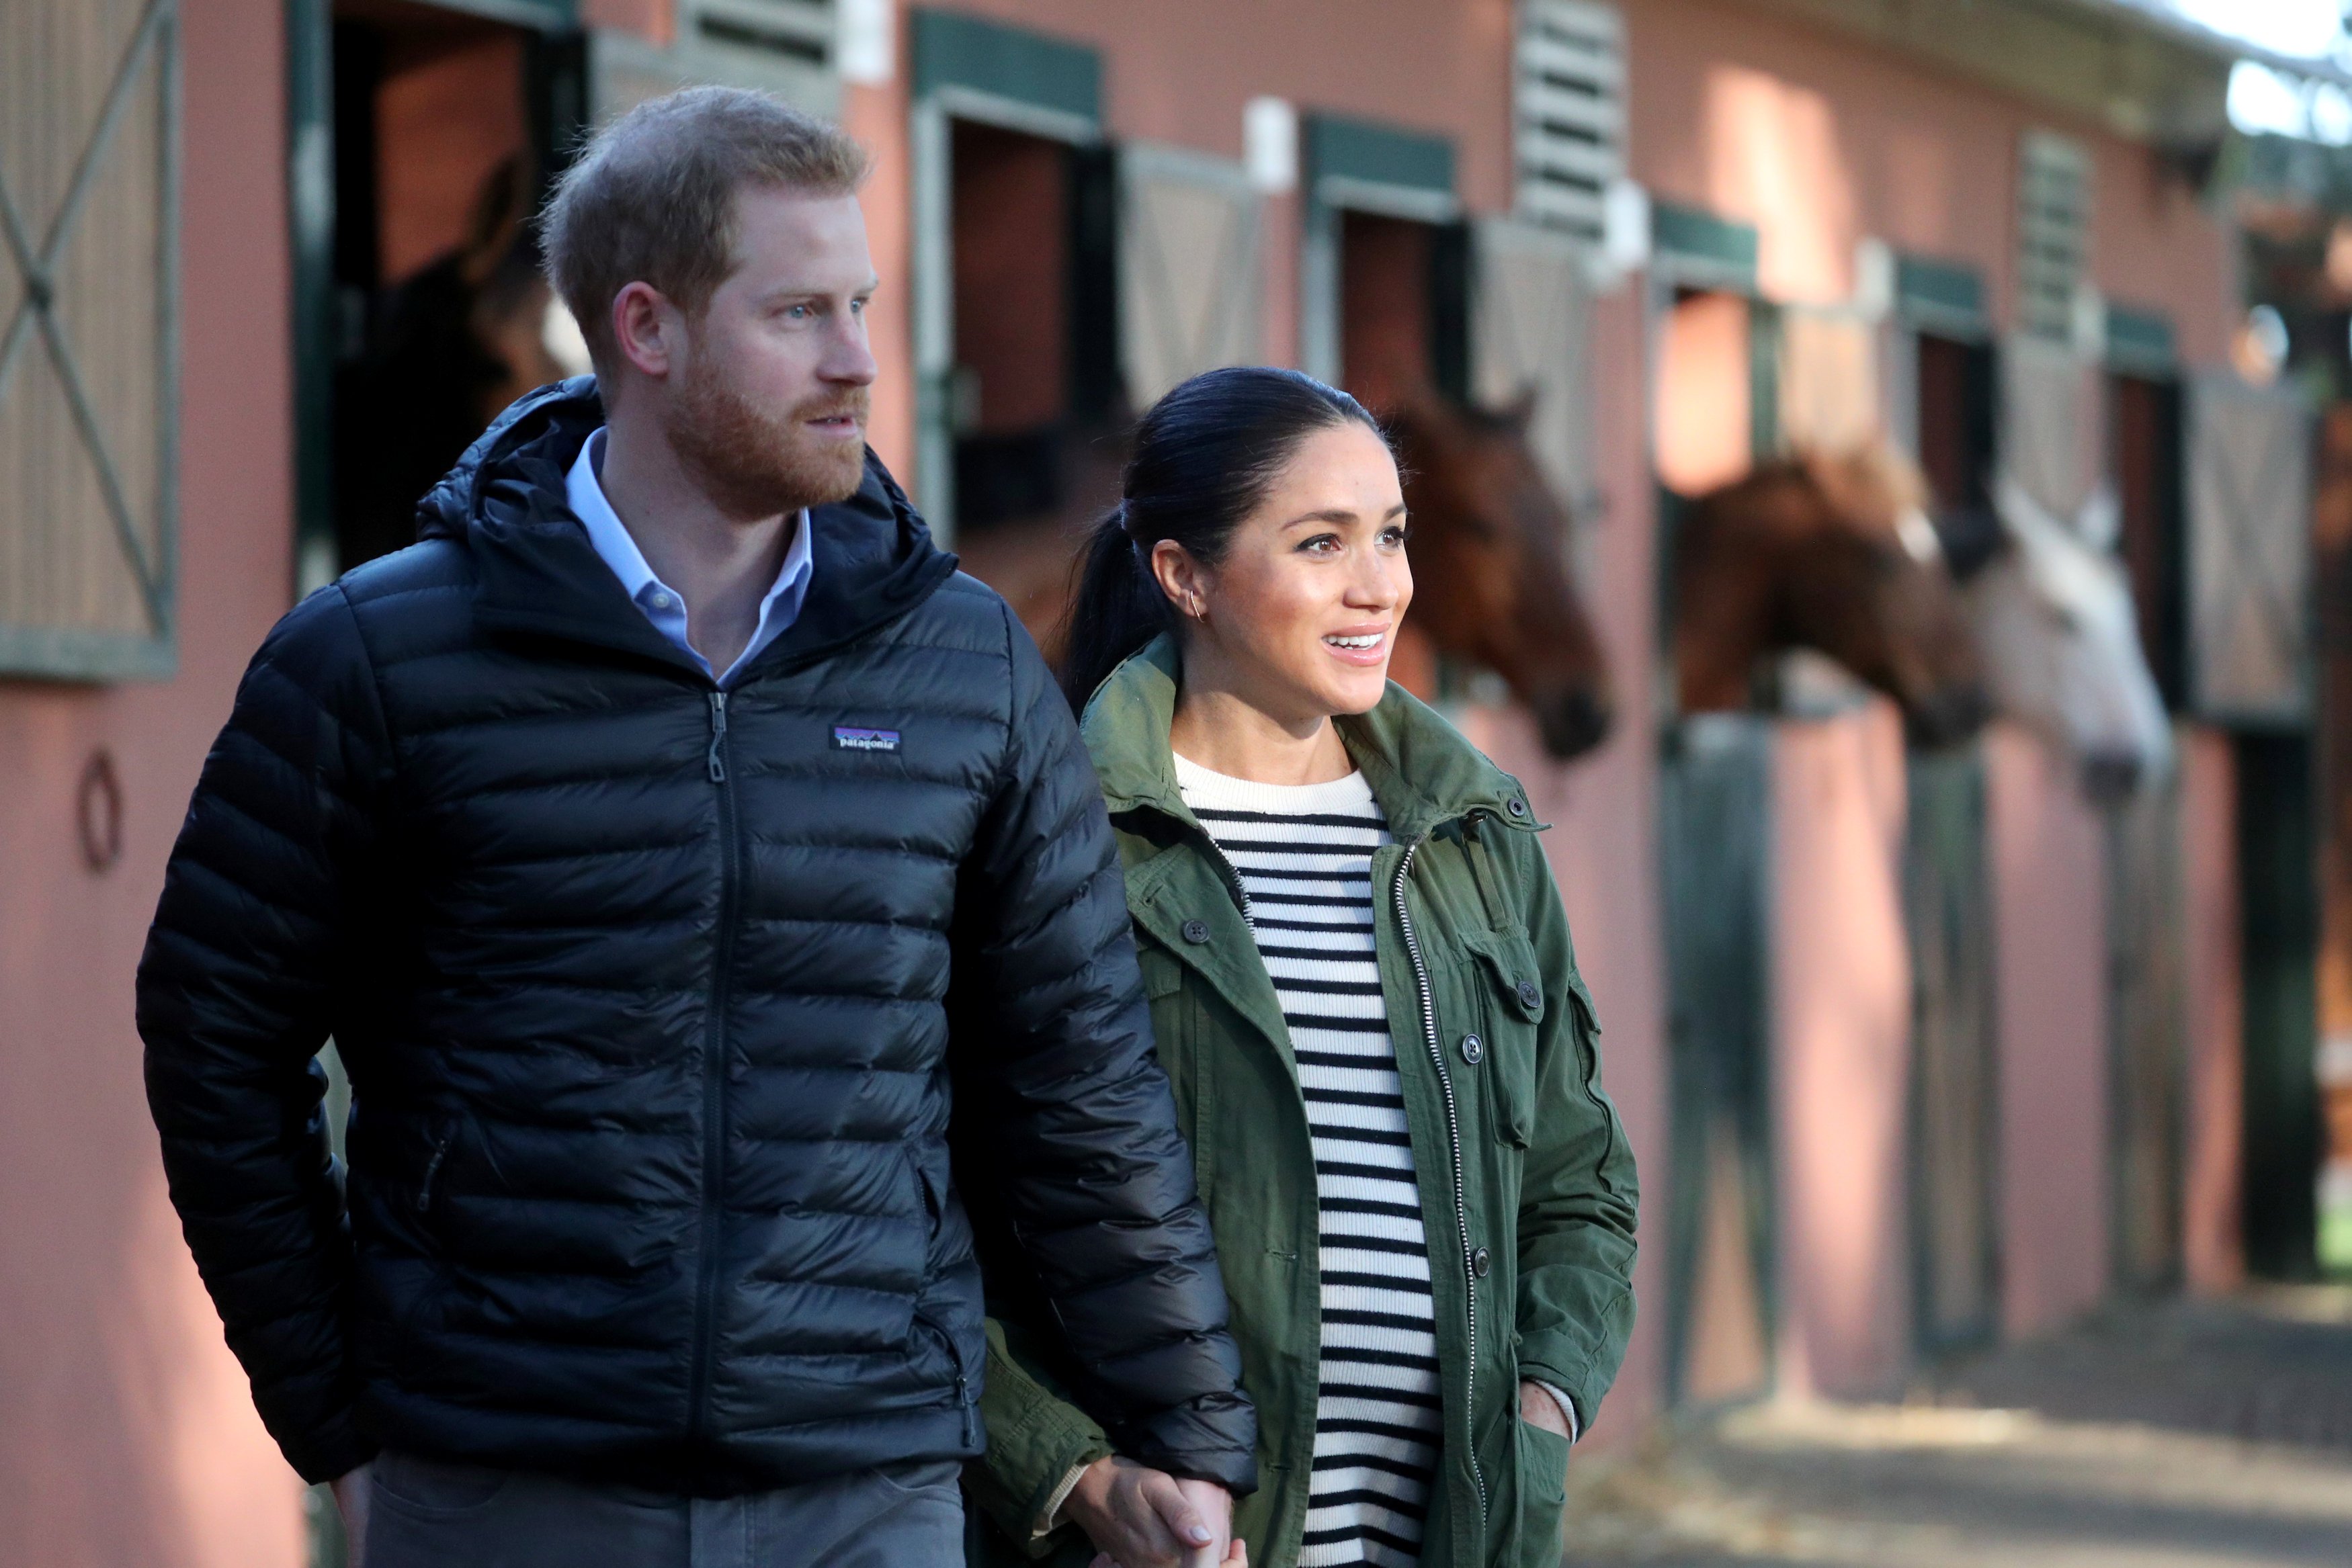 Prince Harry and Meghan Markle pictured at the Moroccan Royal Federation of Equitation Sports, 2019, Rabat Morocco.